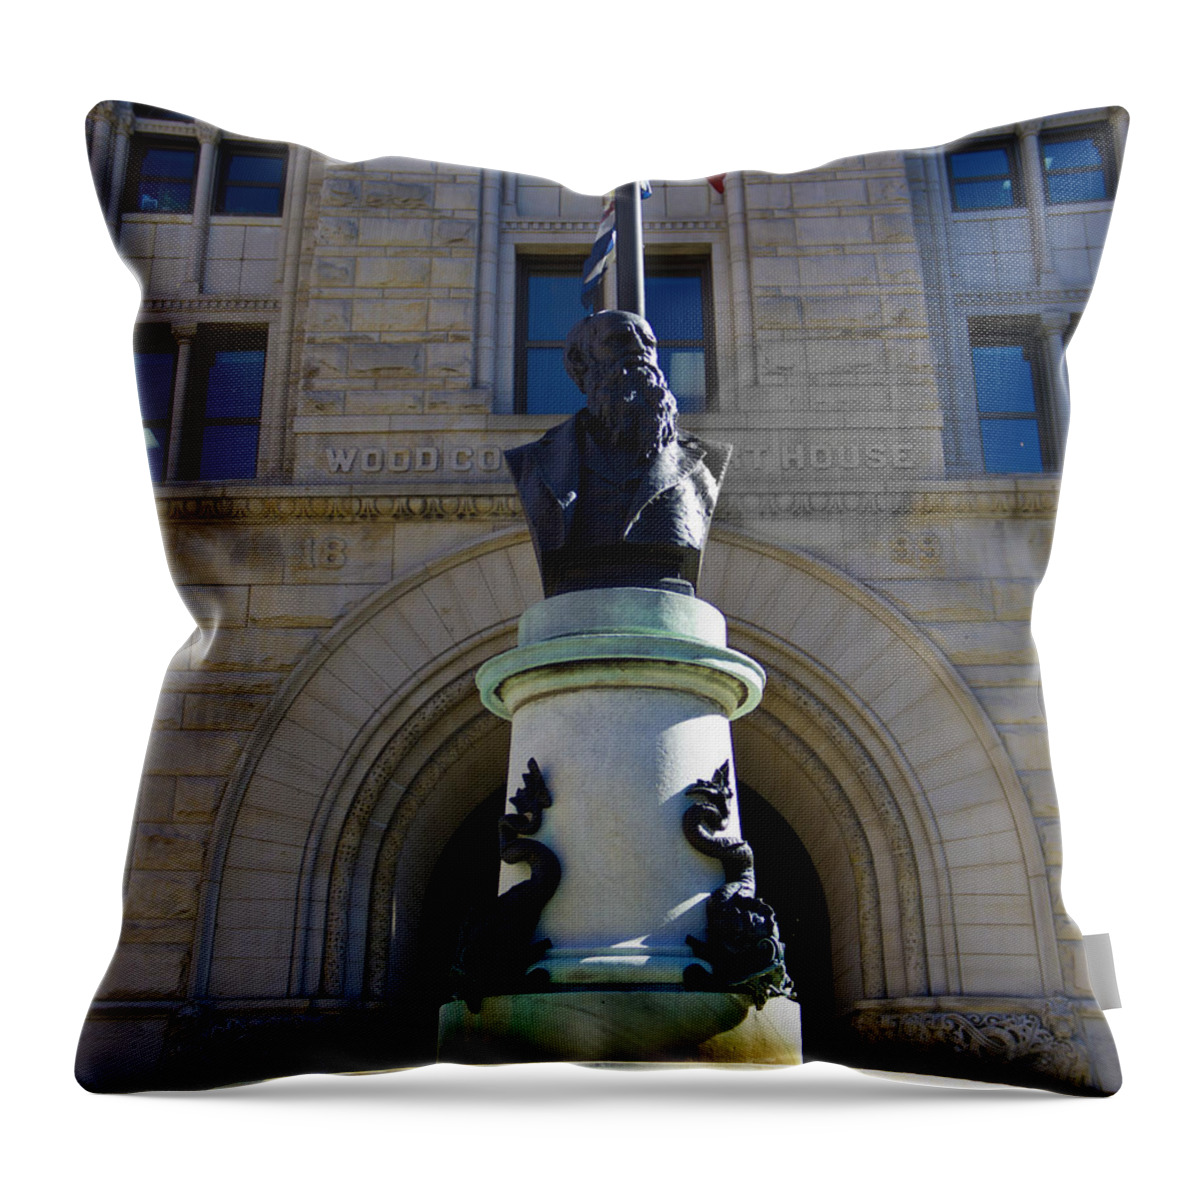 Parkersburg Throw Pillow featuring the photograph Courthouse Statue by Jonny D